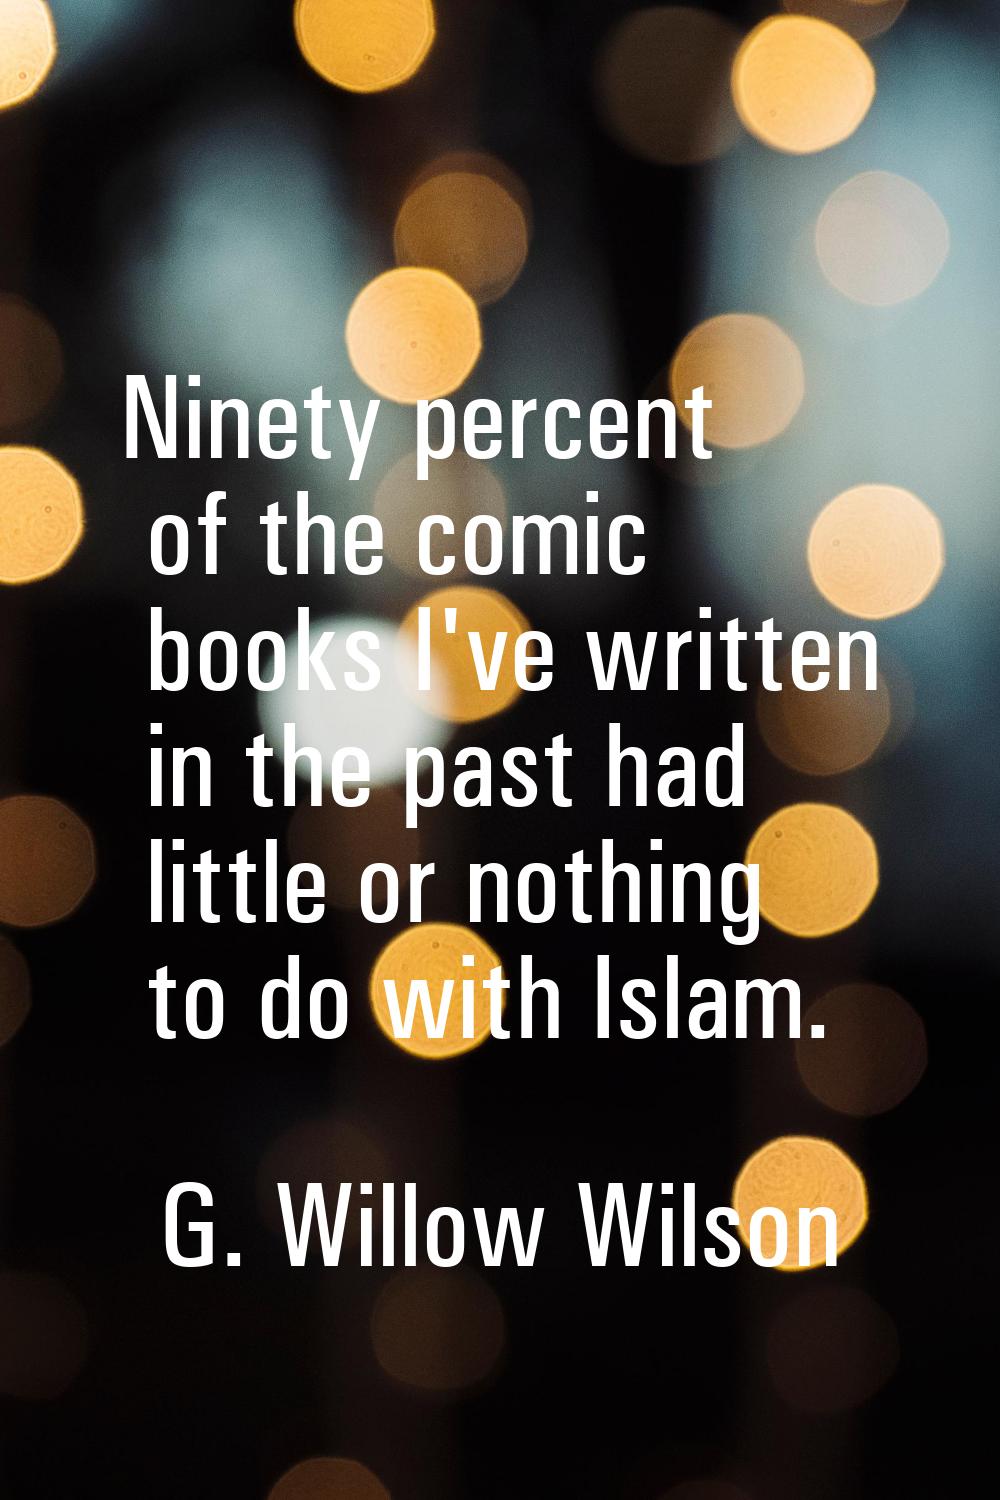 Ninety percent of the comic books I've written in the past had little or nothing to do with Islam.